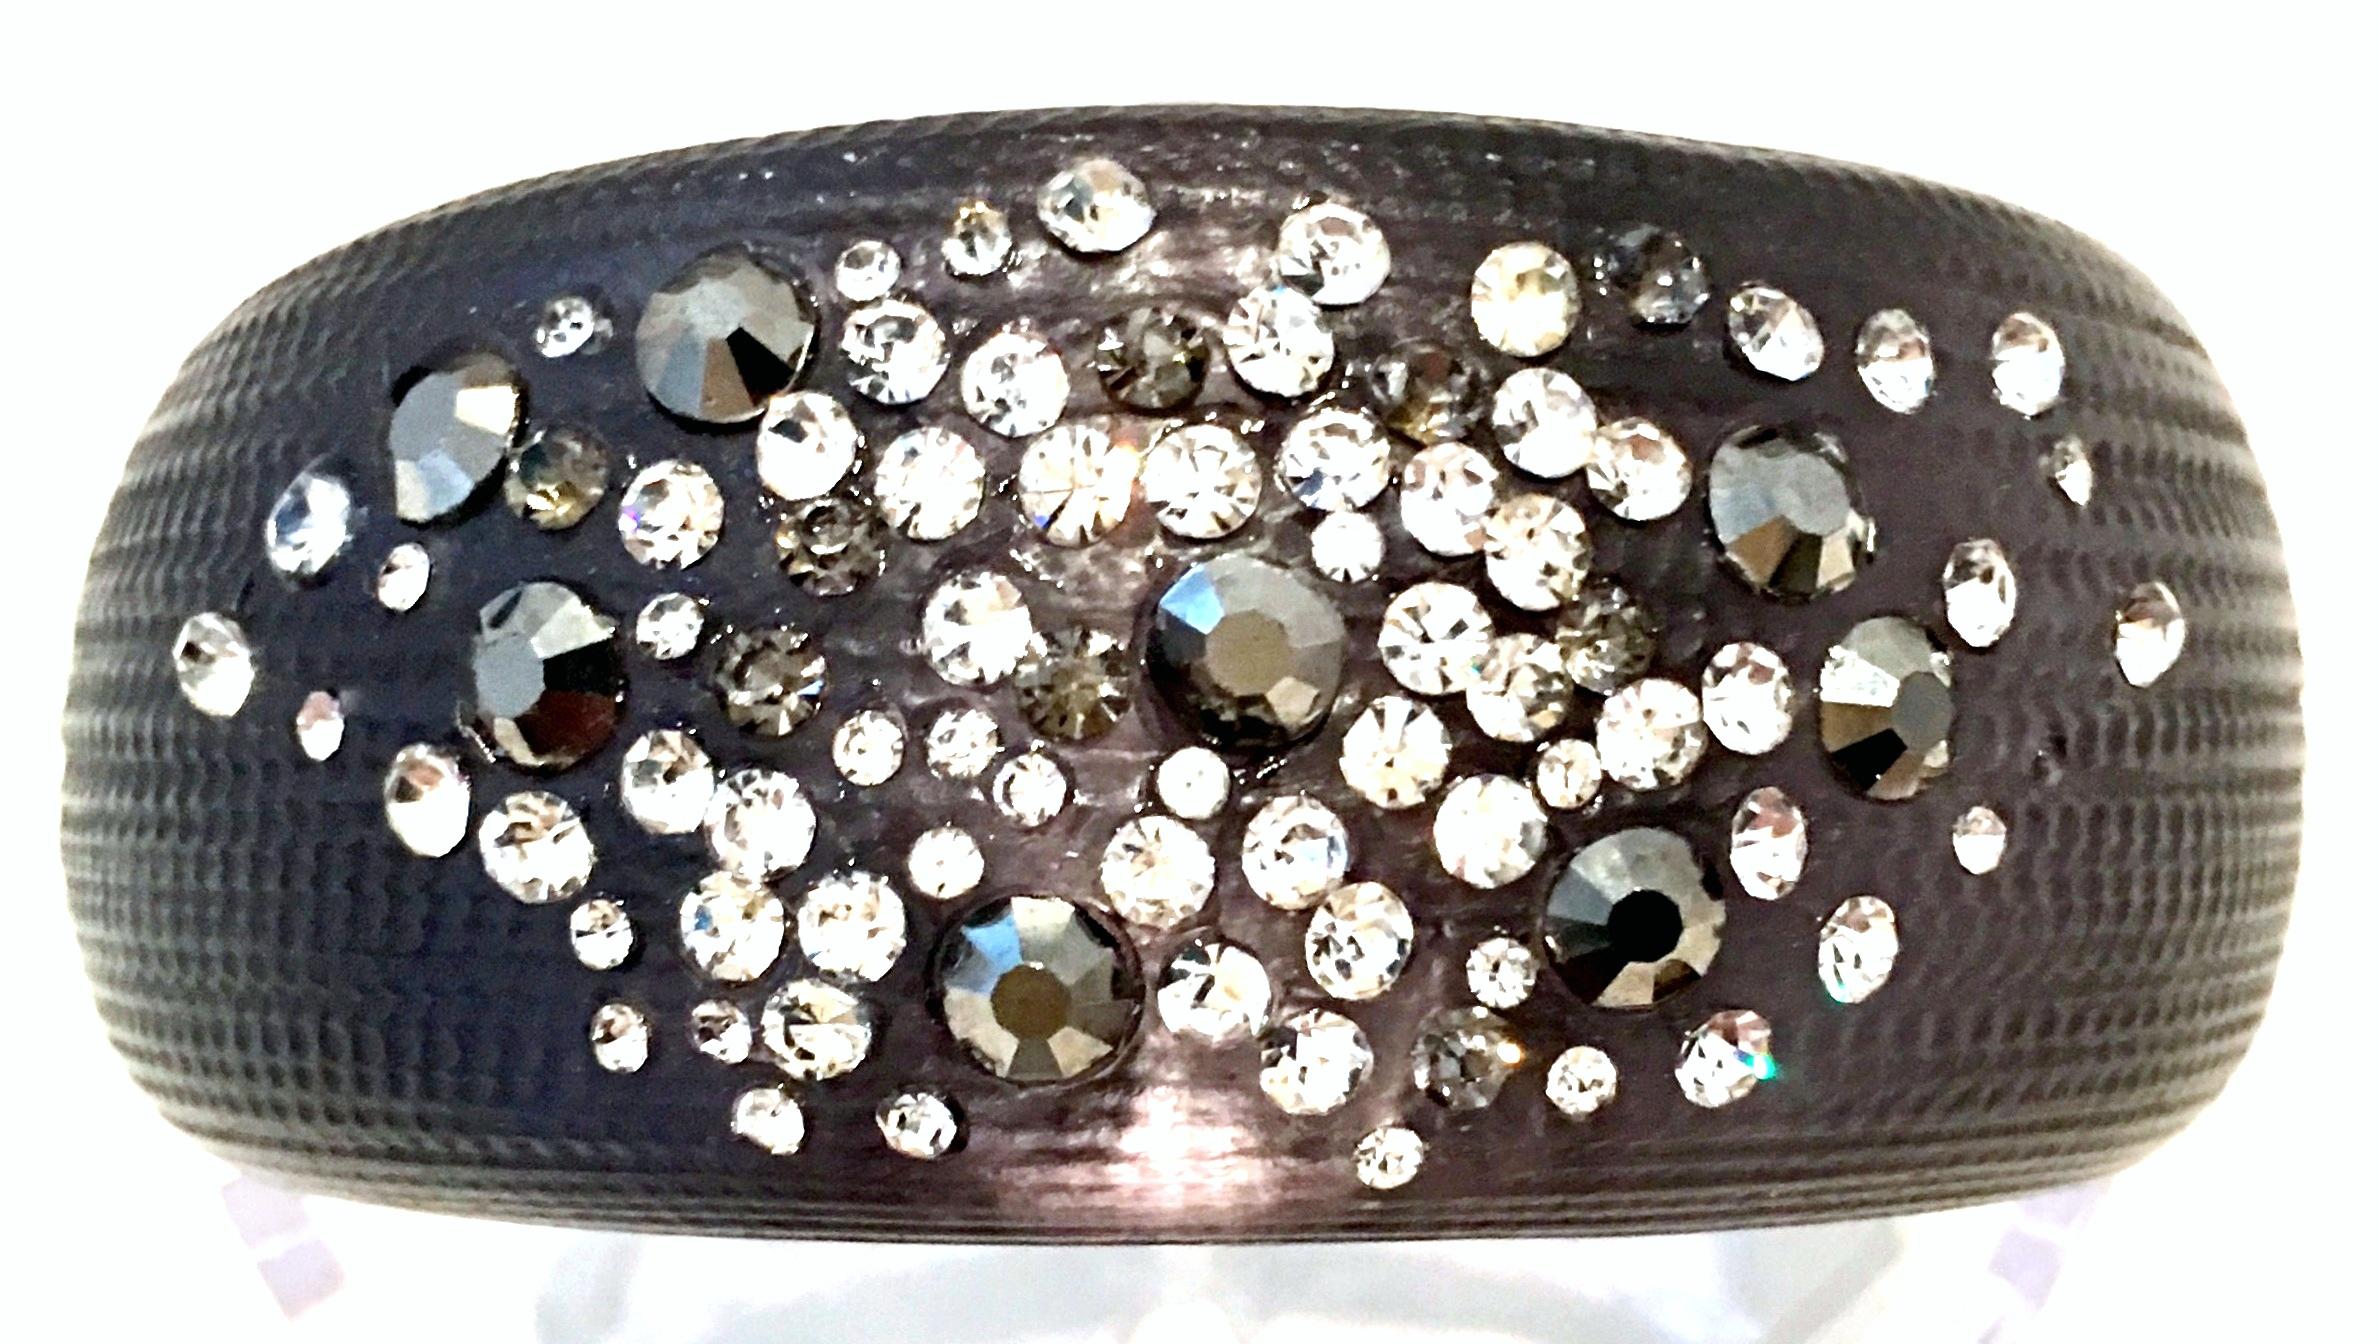 Contemporary Lucite & Swarovski Crystal Rhinestone Bangle Bracelet In the Style Of Alexis Bittar. This substantial 2.5